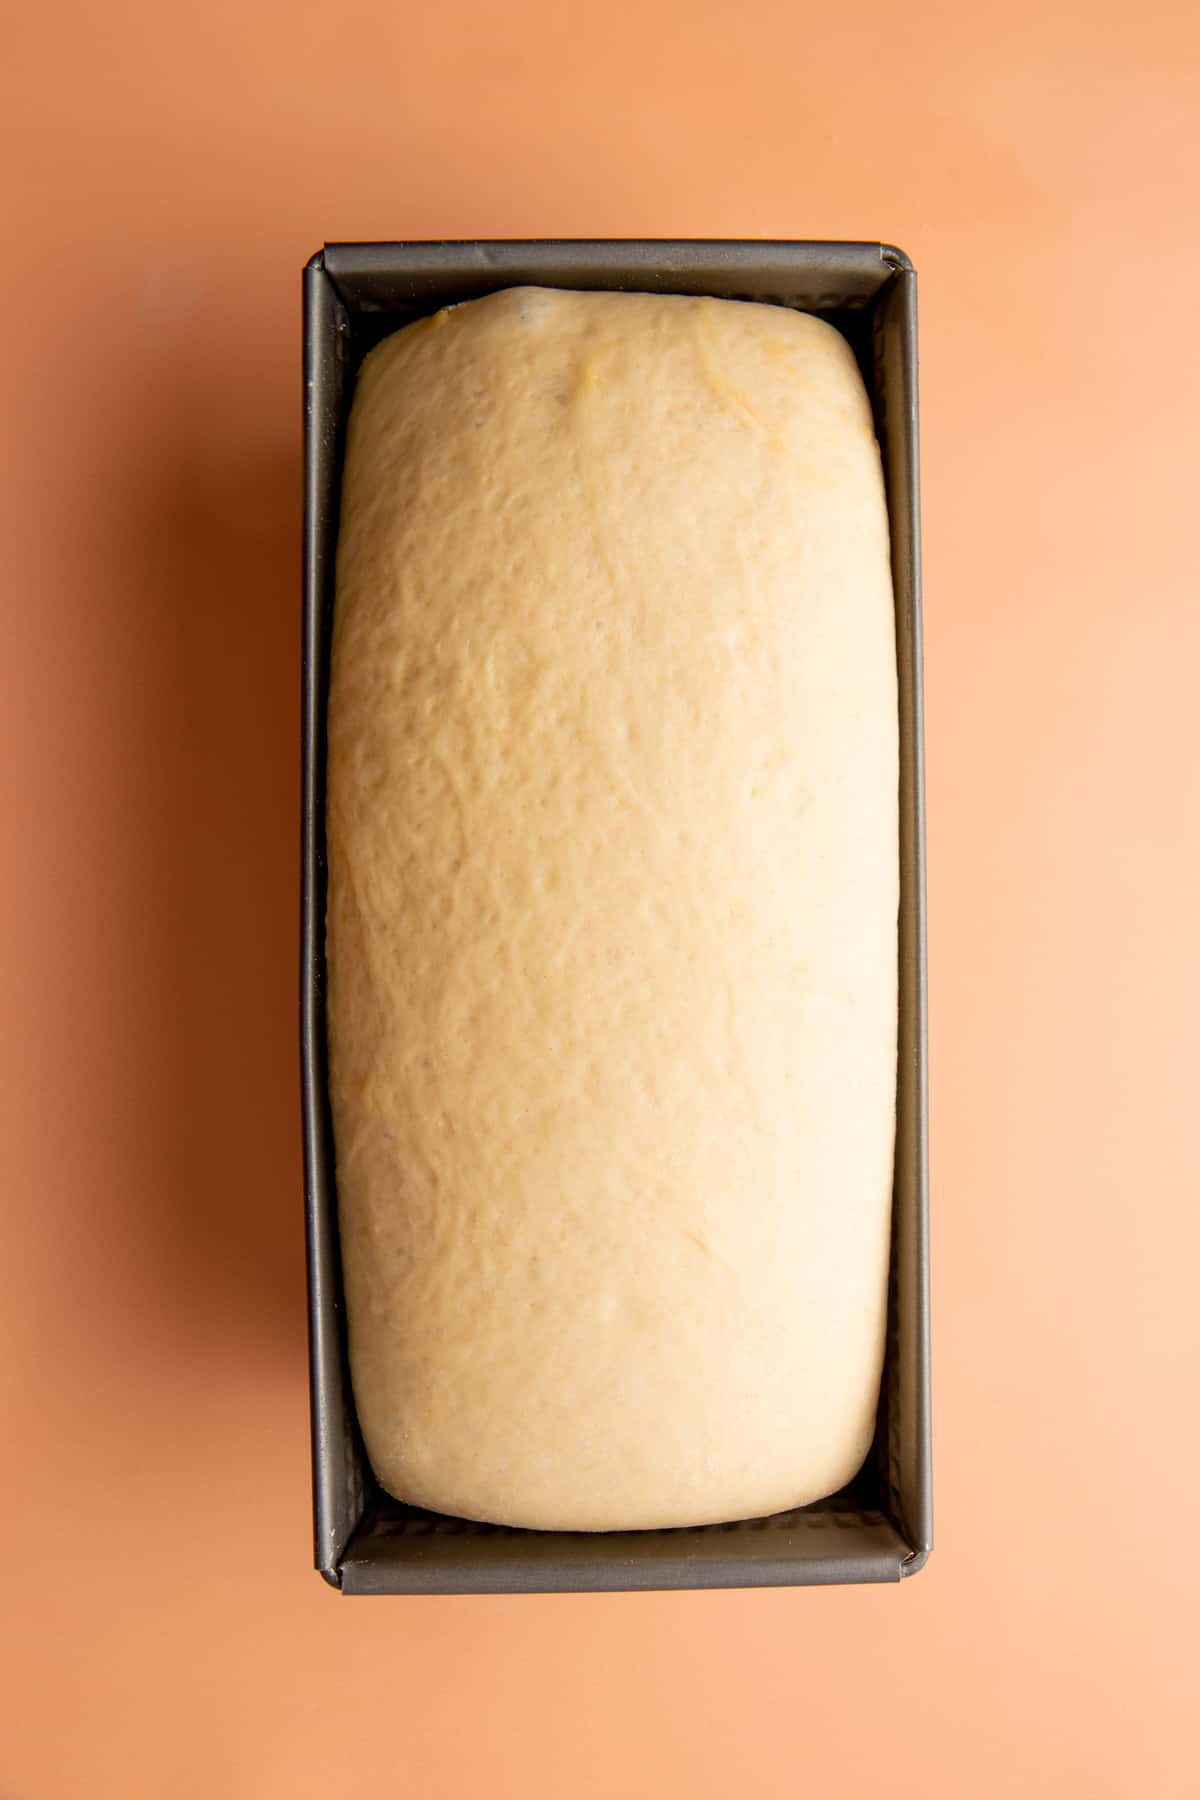 A loaf pan holds risen bread dough.